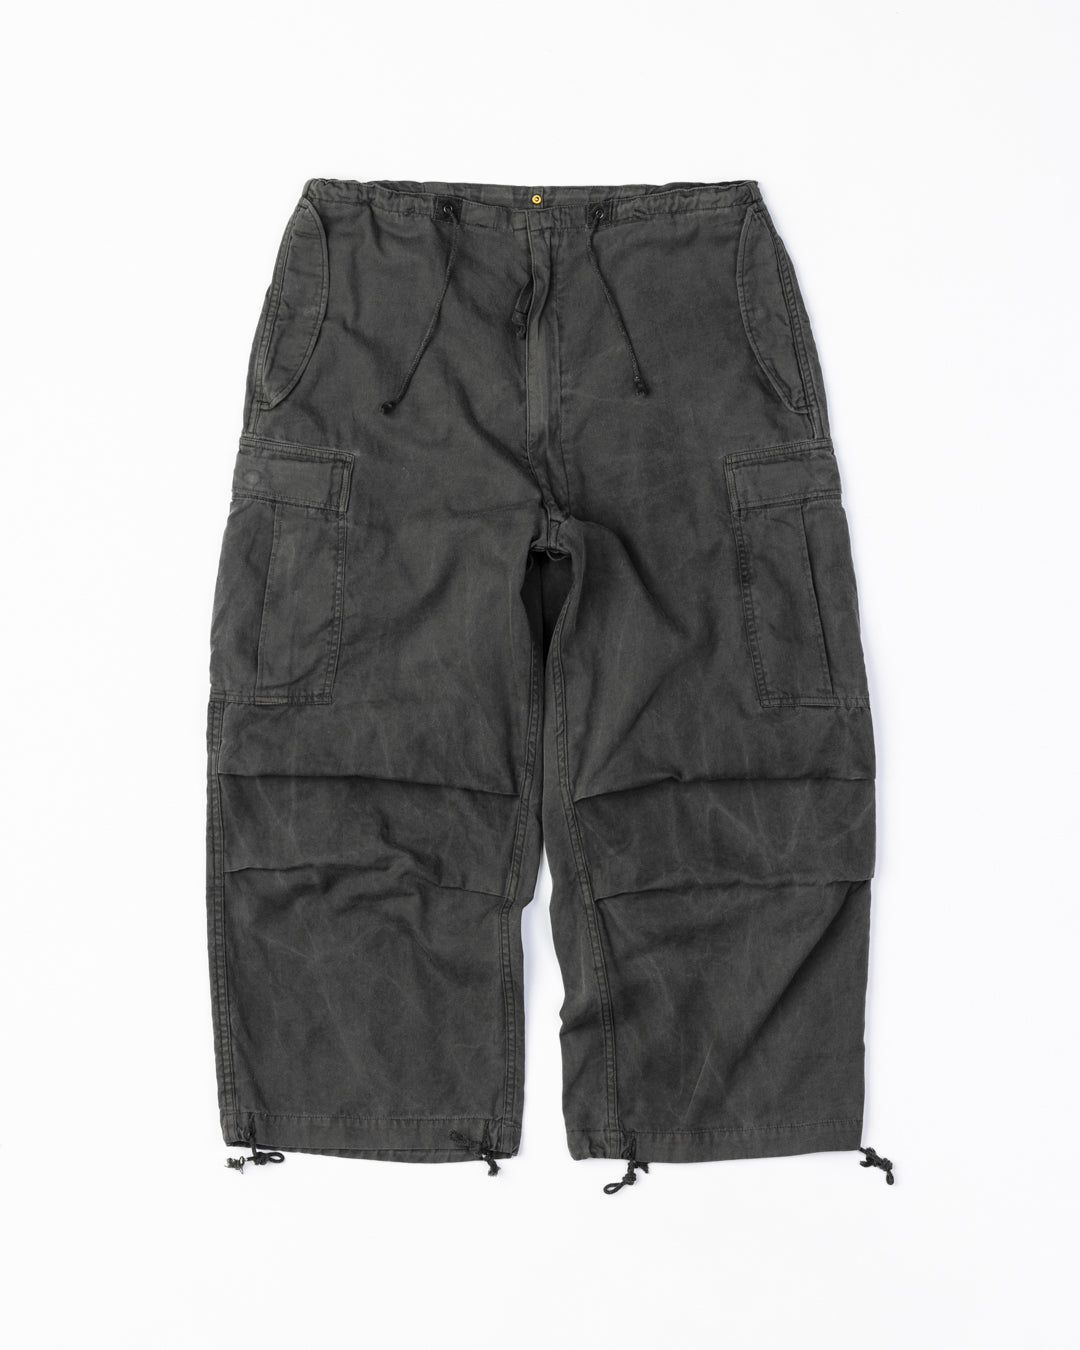 AN264 M-51 TYPE FIELD OVER PANTS BLACK